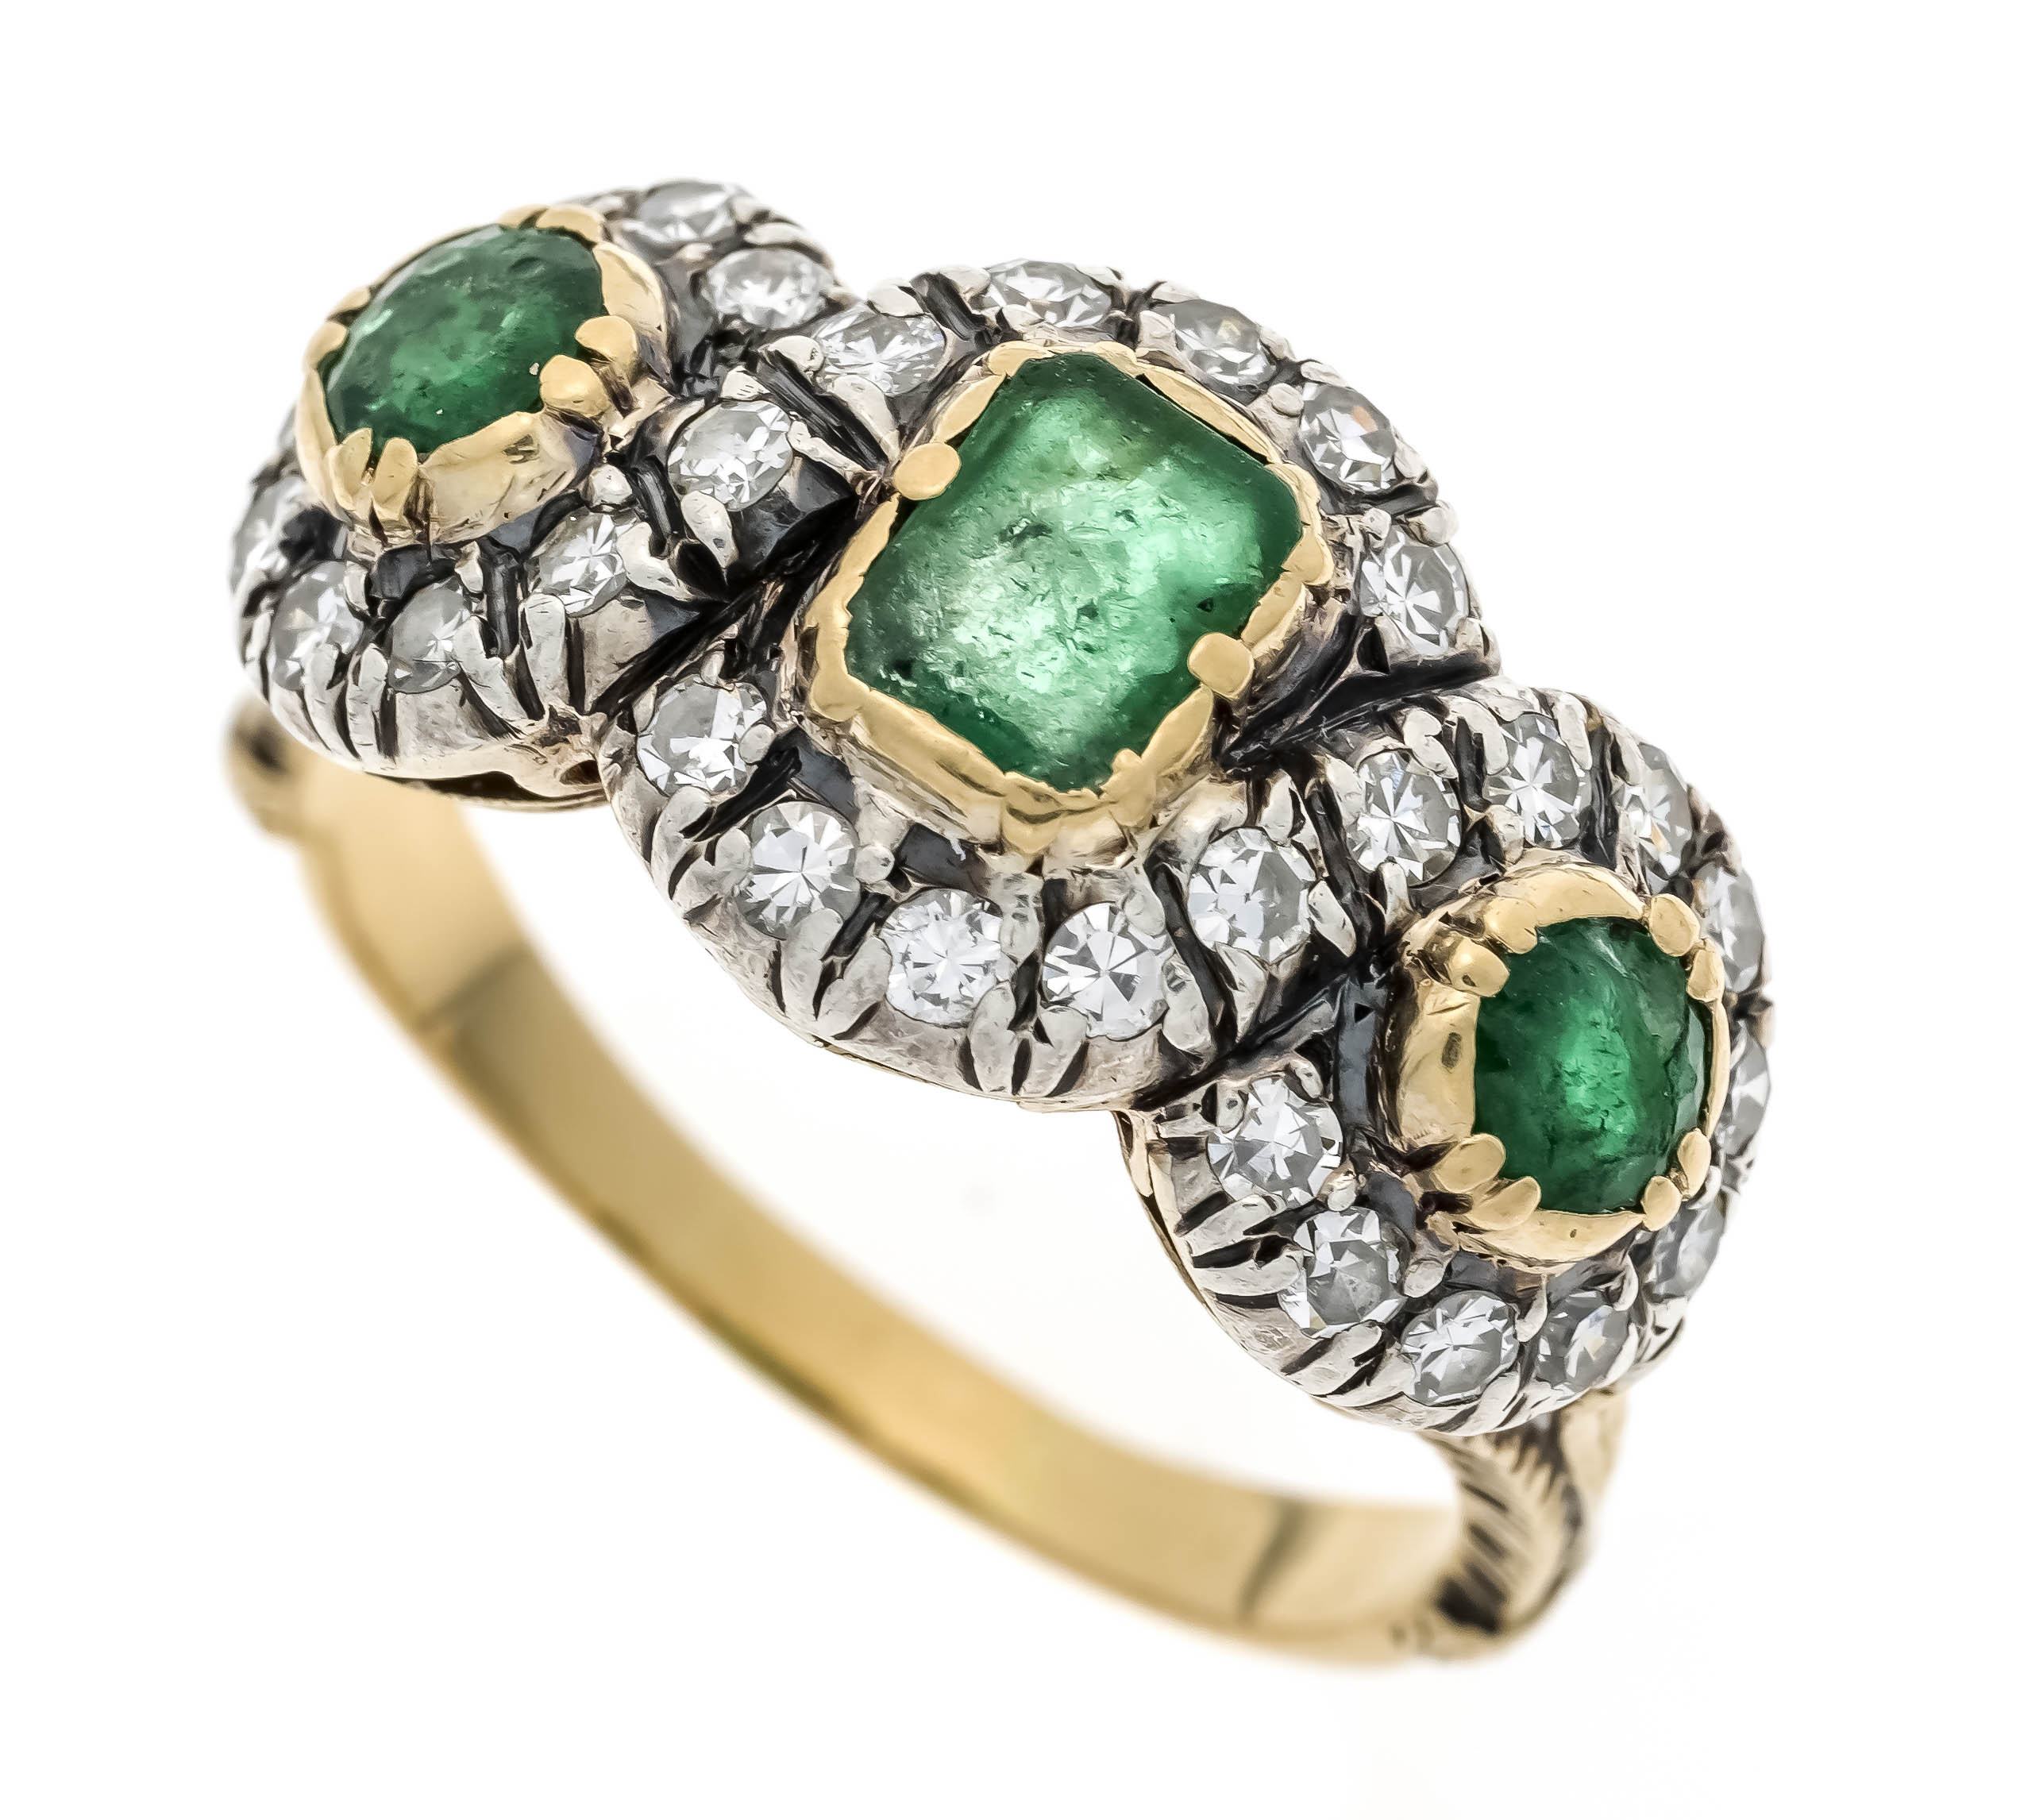 An emerald diamond ring, GG/WG 750/000, unmarked, tested, with one emerald-cut emerald, 5.9 x 4.6